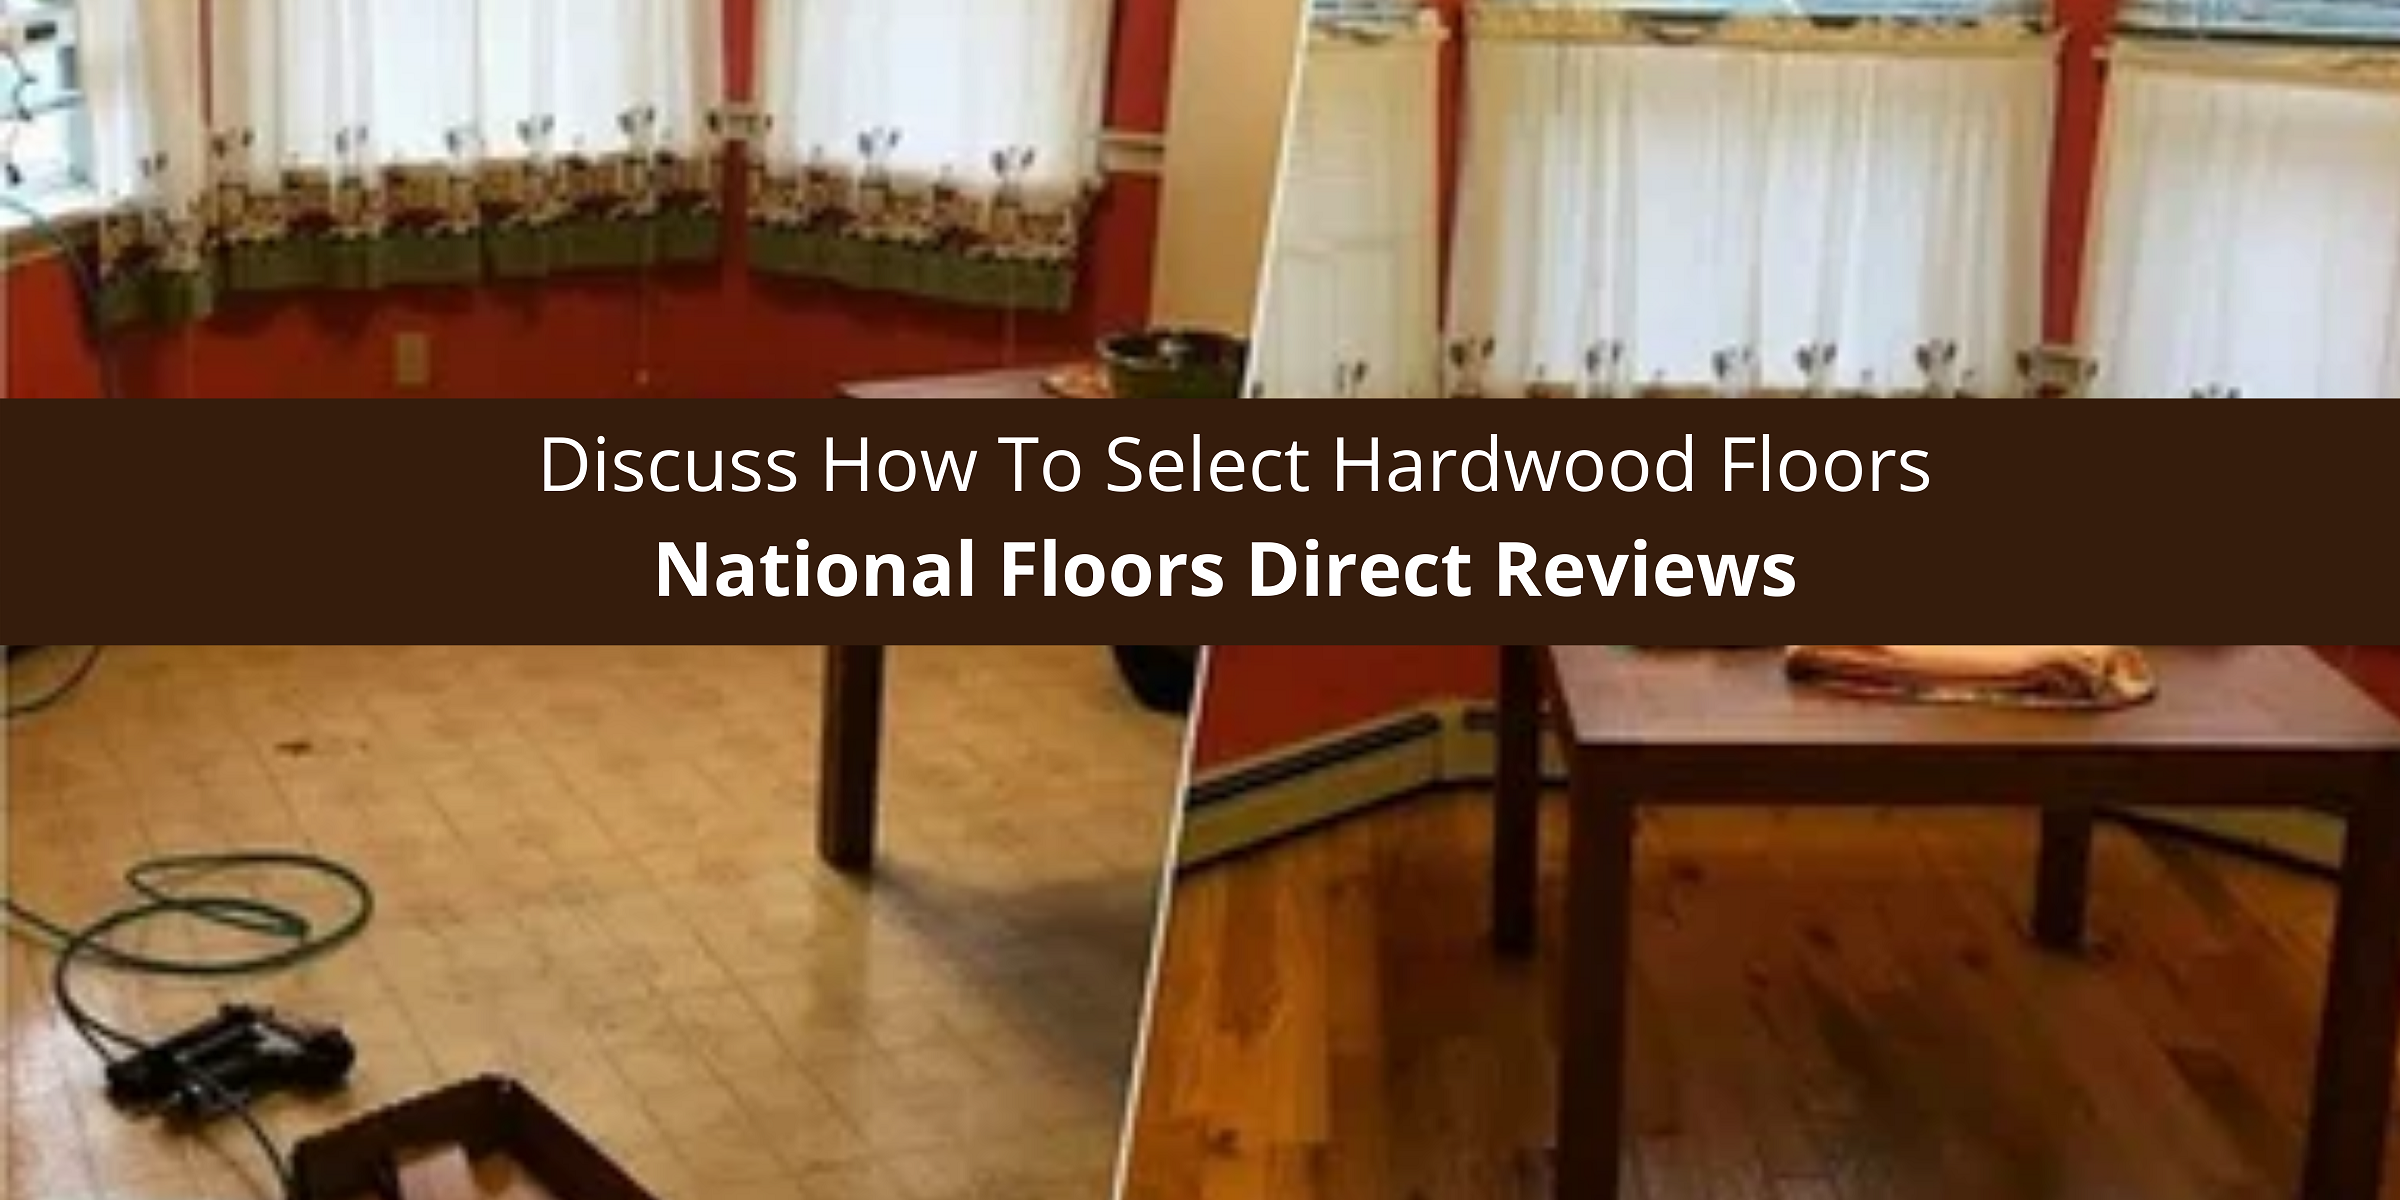 National Floors Direct Reviews Discuss How To Select Hardwood Floors